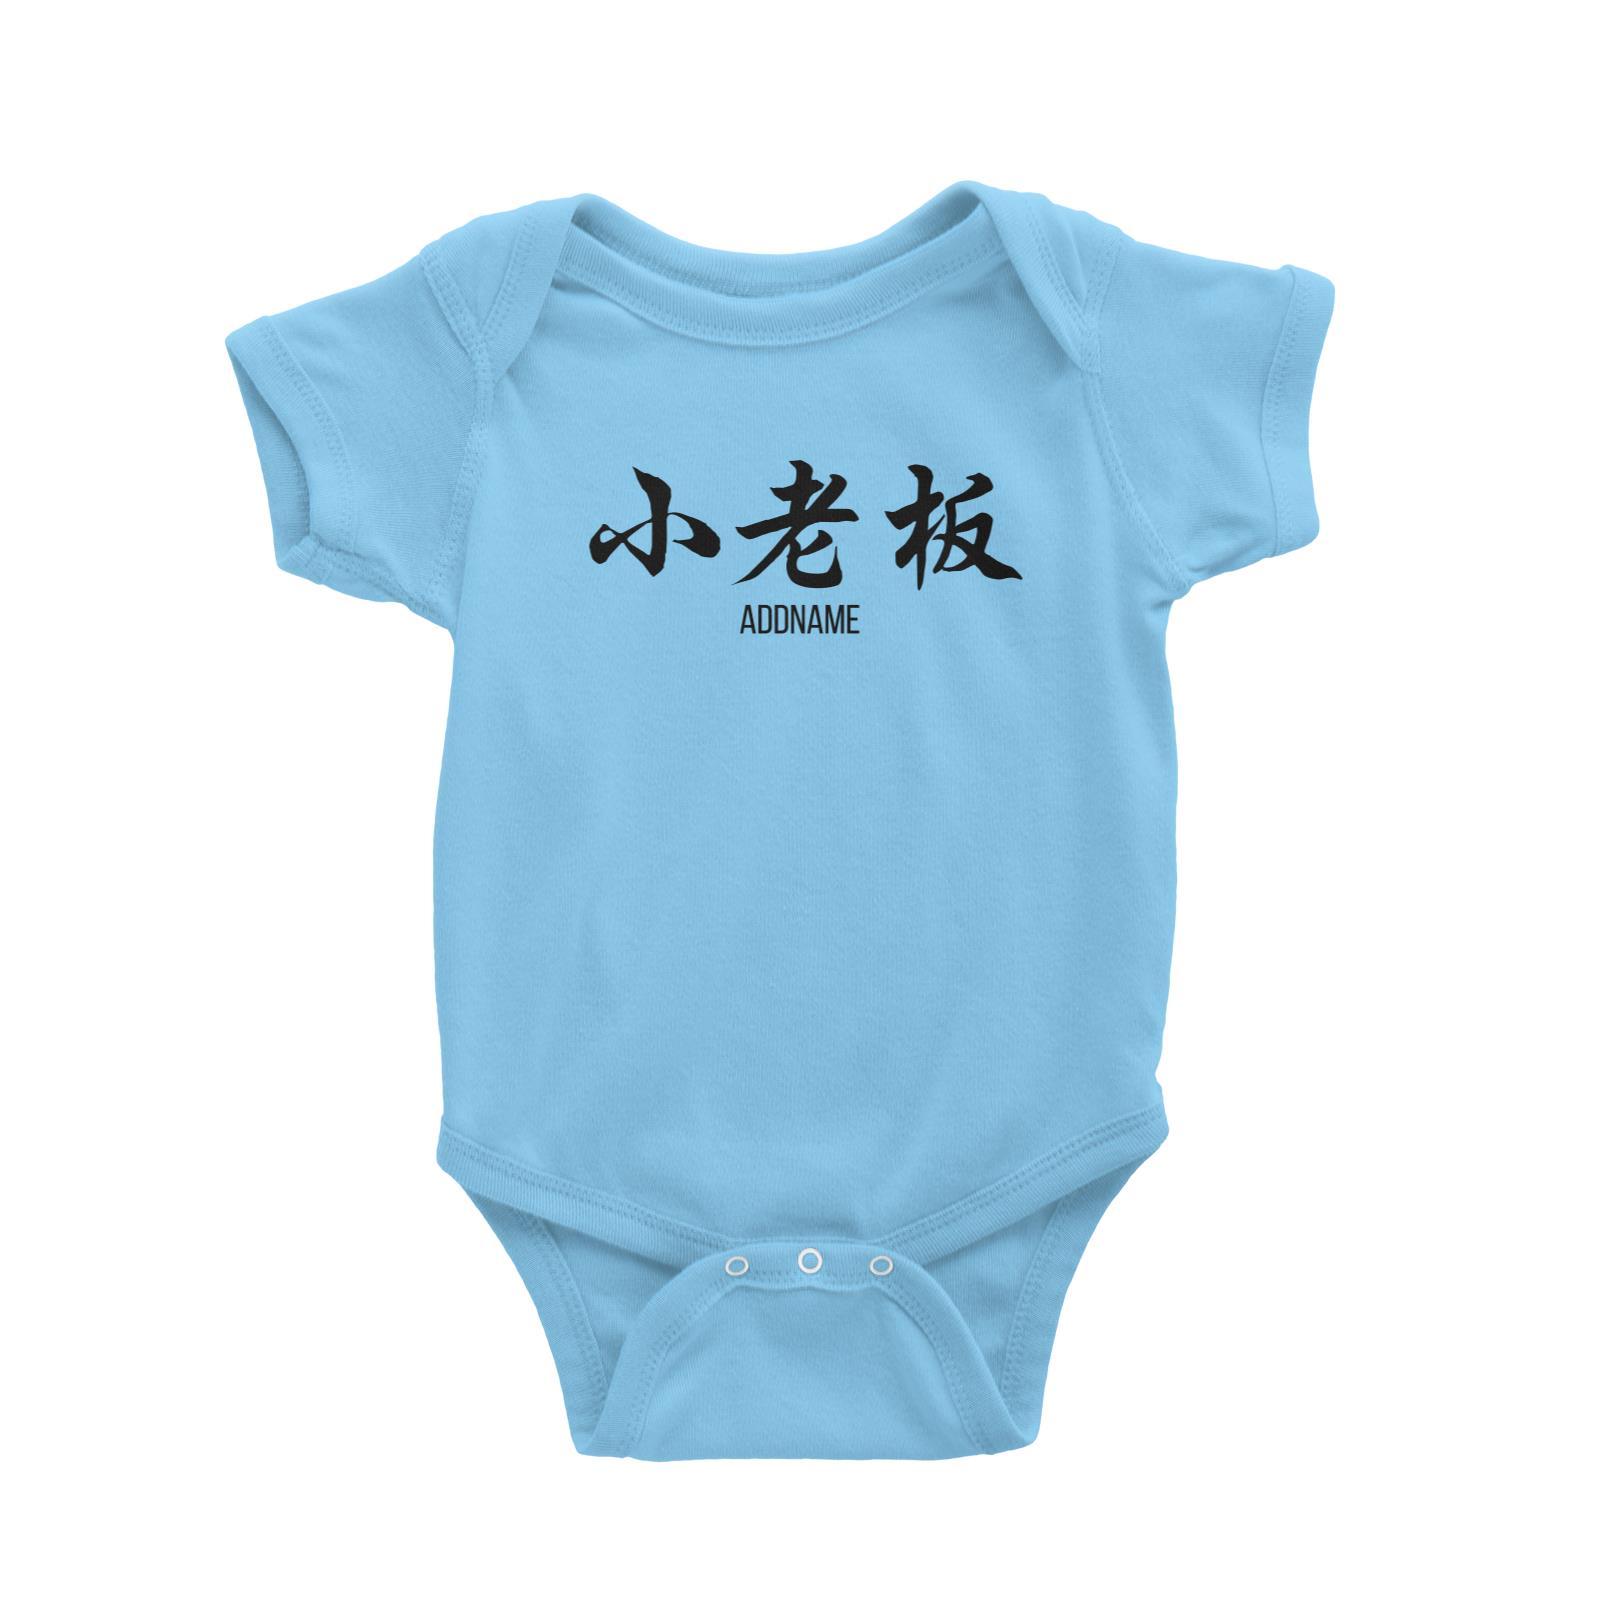 Small Boss in Chinese Calligraphy Baby Romper